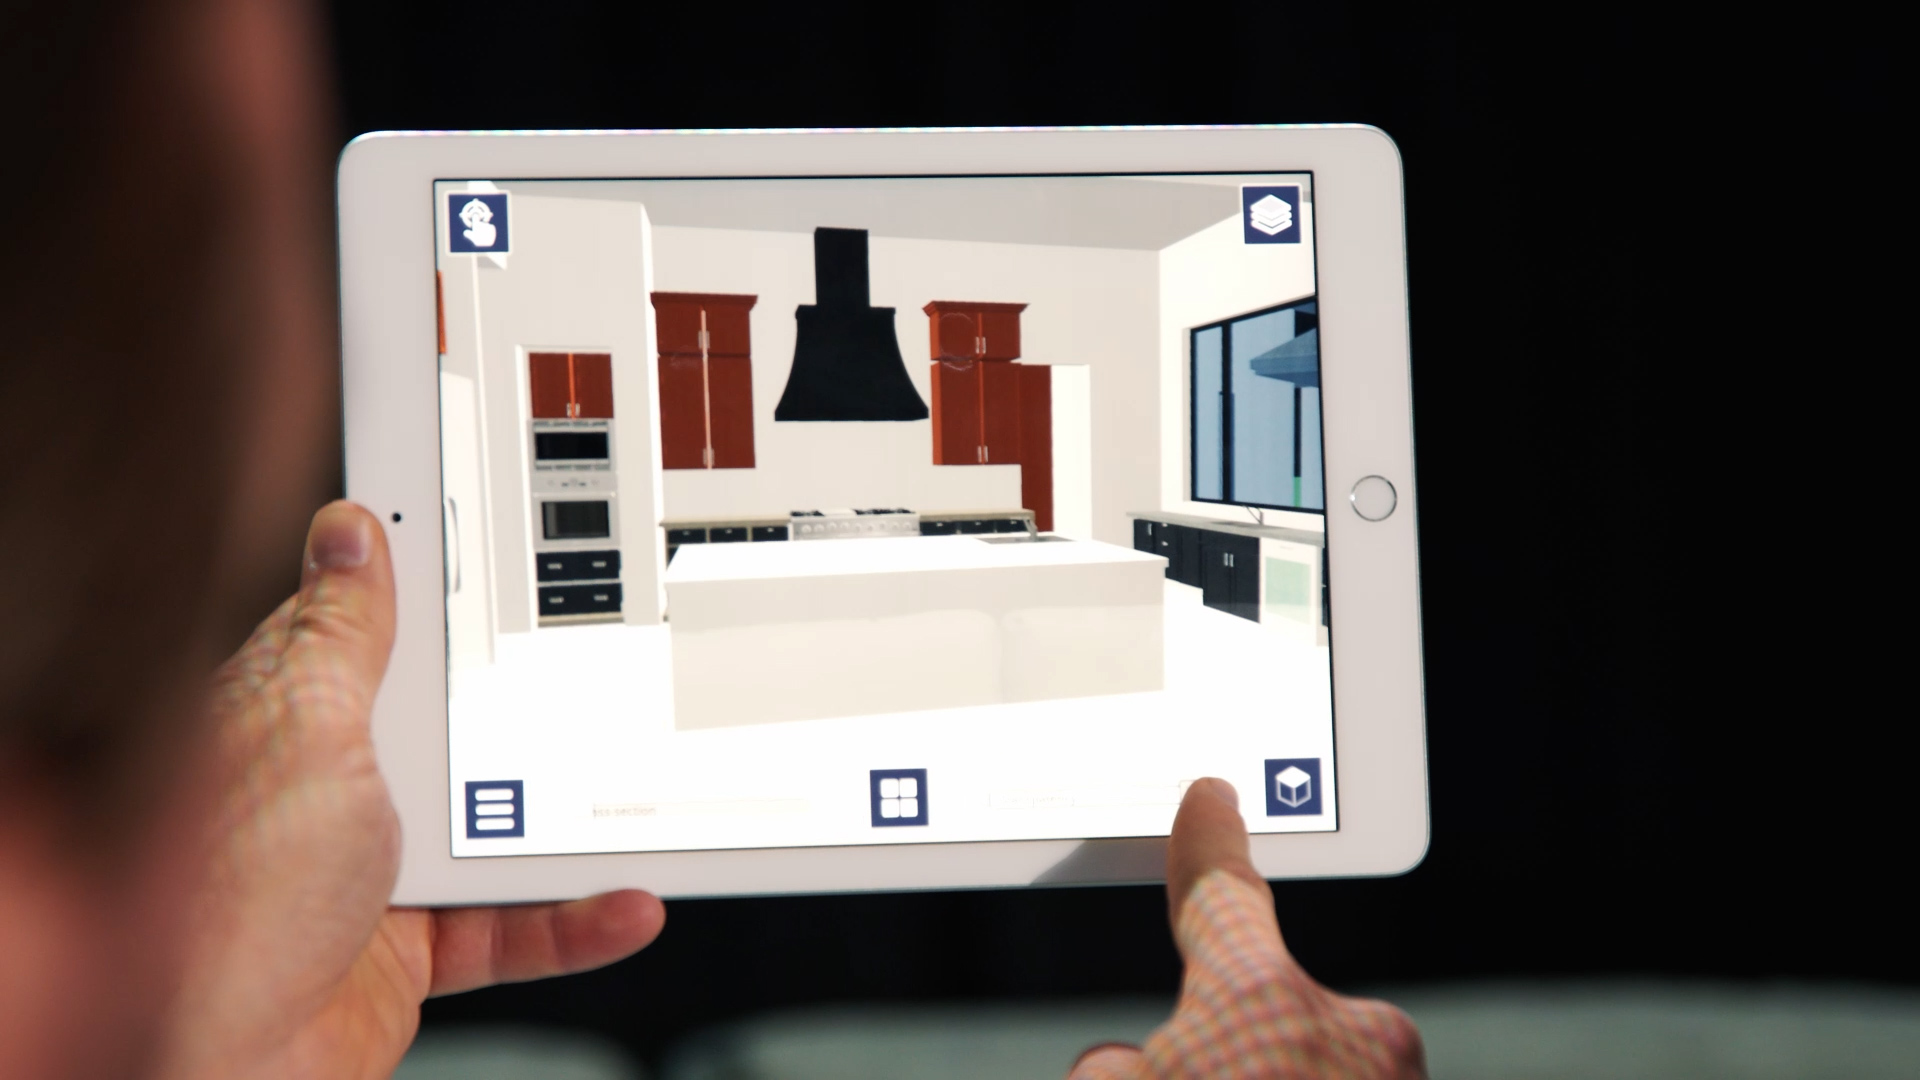 Image of person pointing at 3d floors plan layout on an iPad